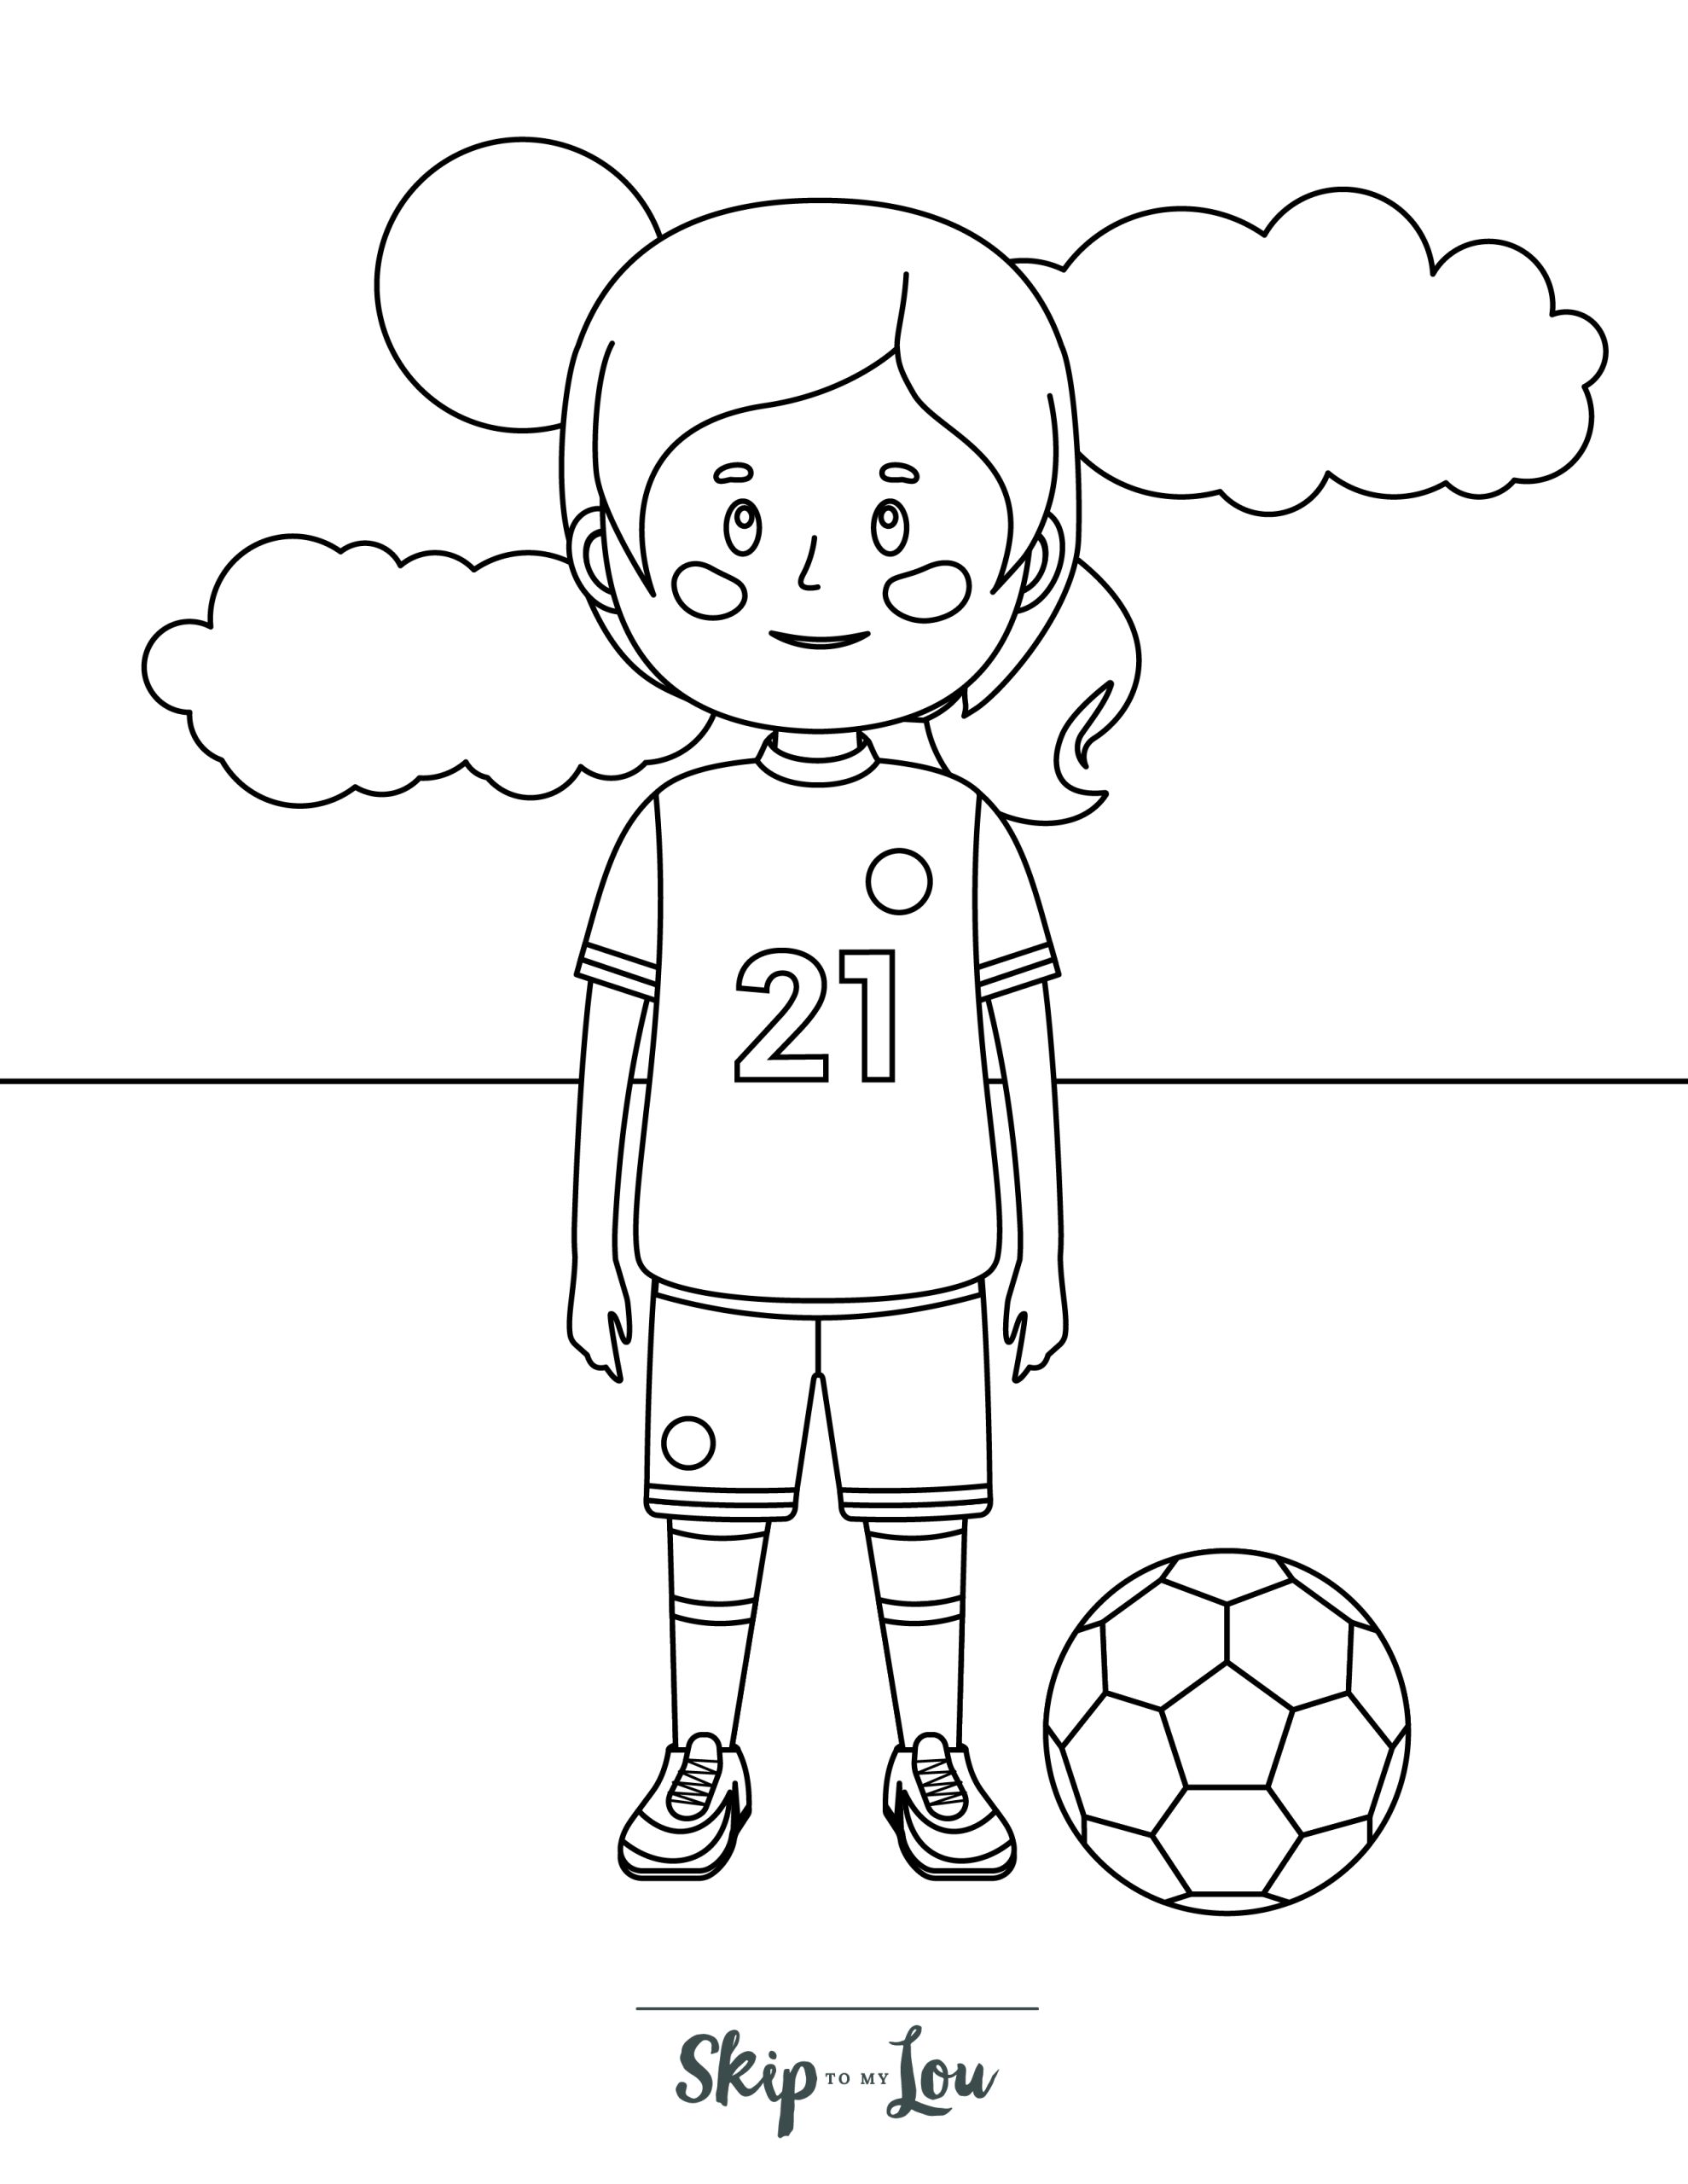 Soccer Coloring Pages - Free Printables ...